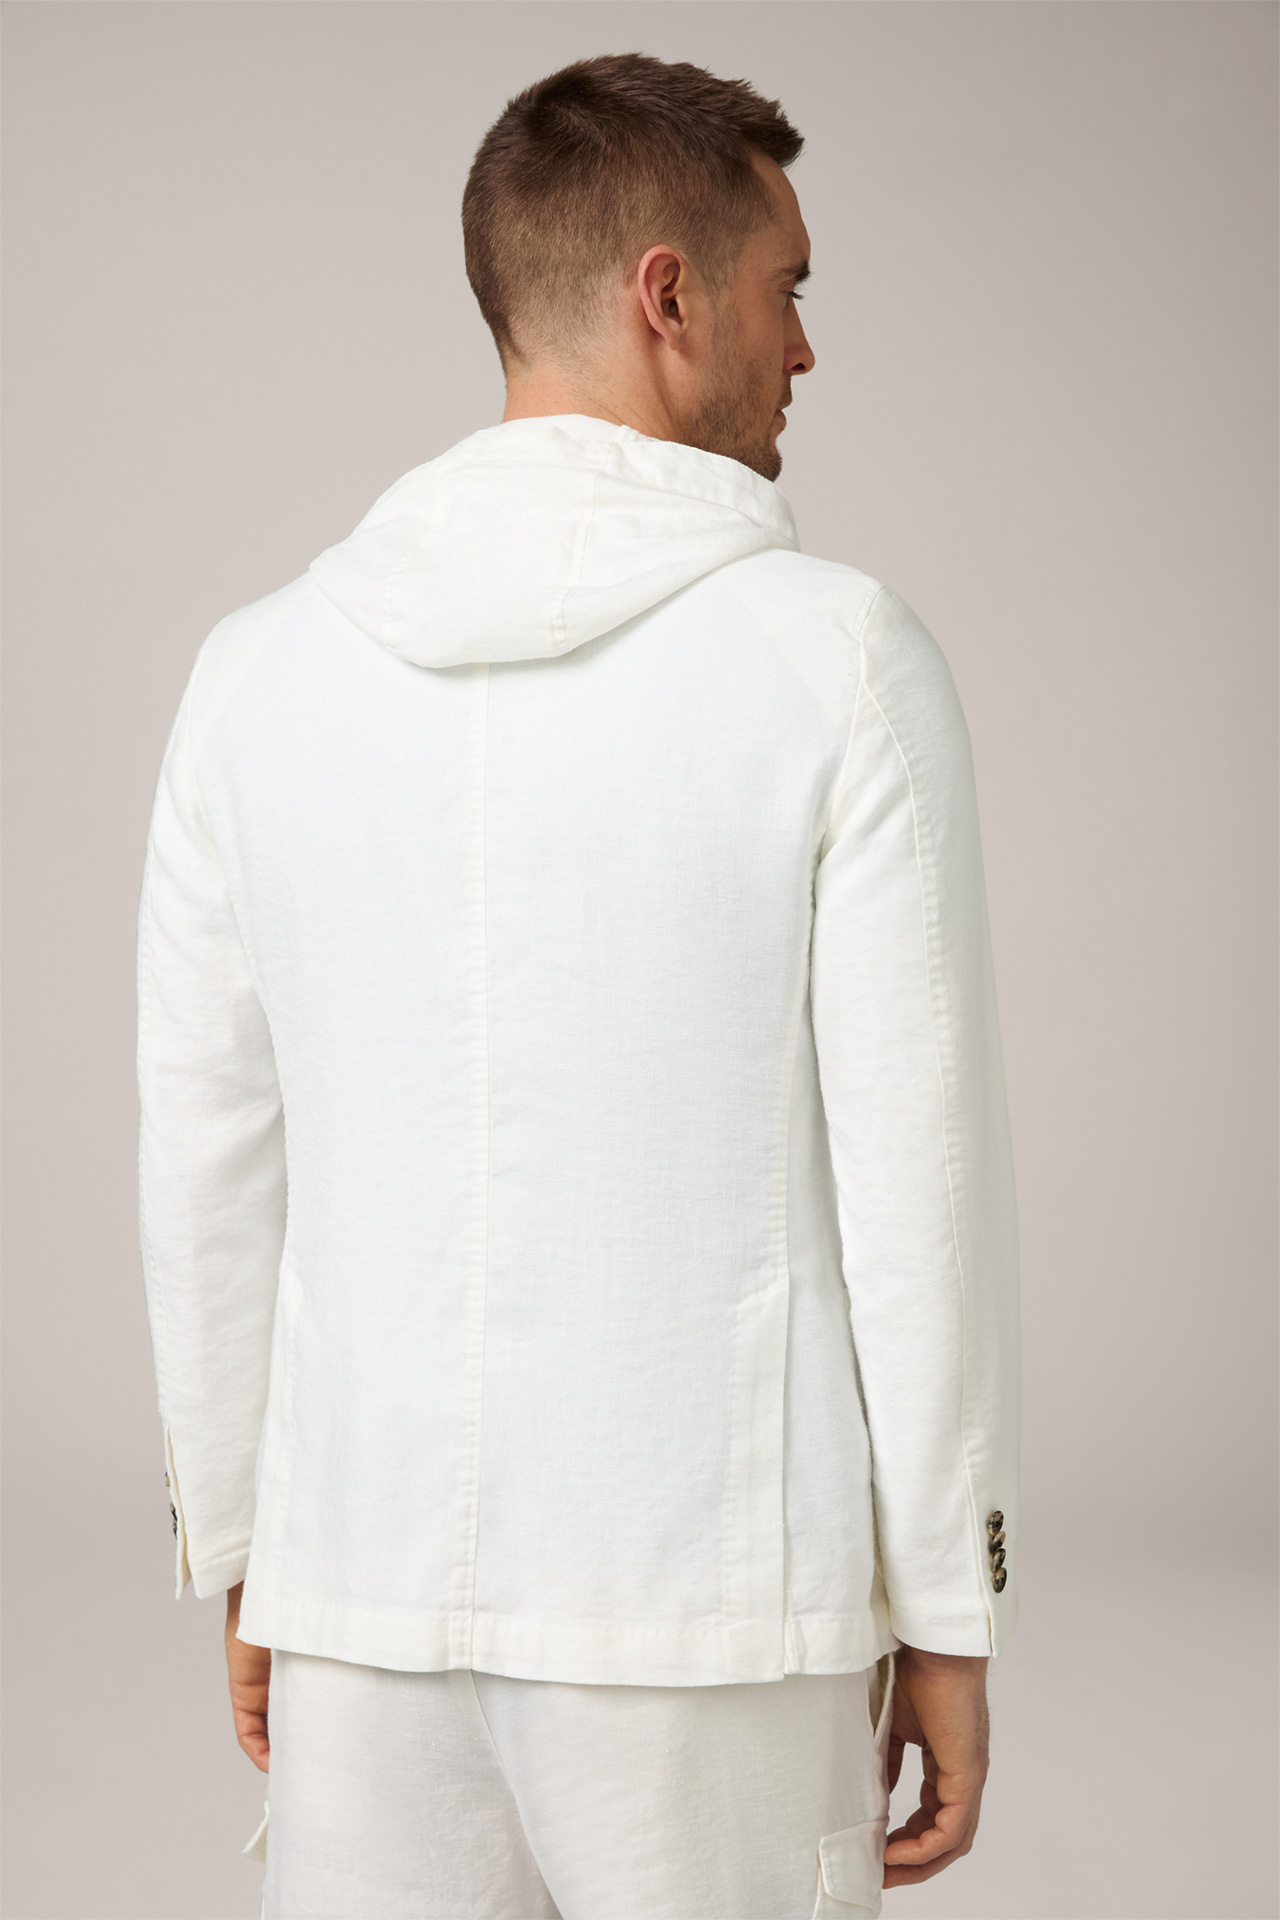 Gilo Modular Linen Mix Jacket with Hooded Inlay in Wool White